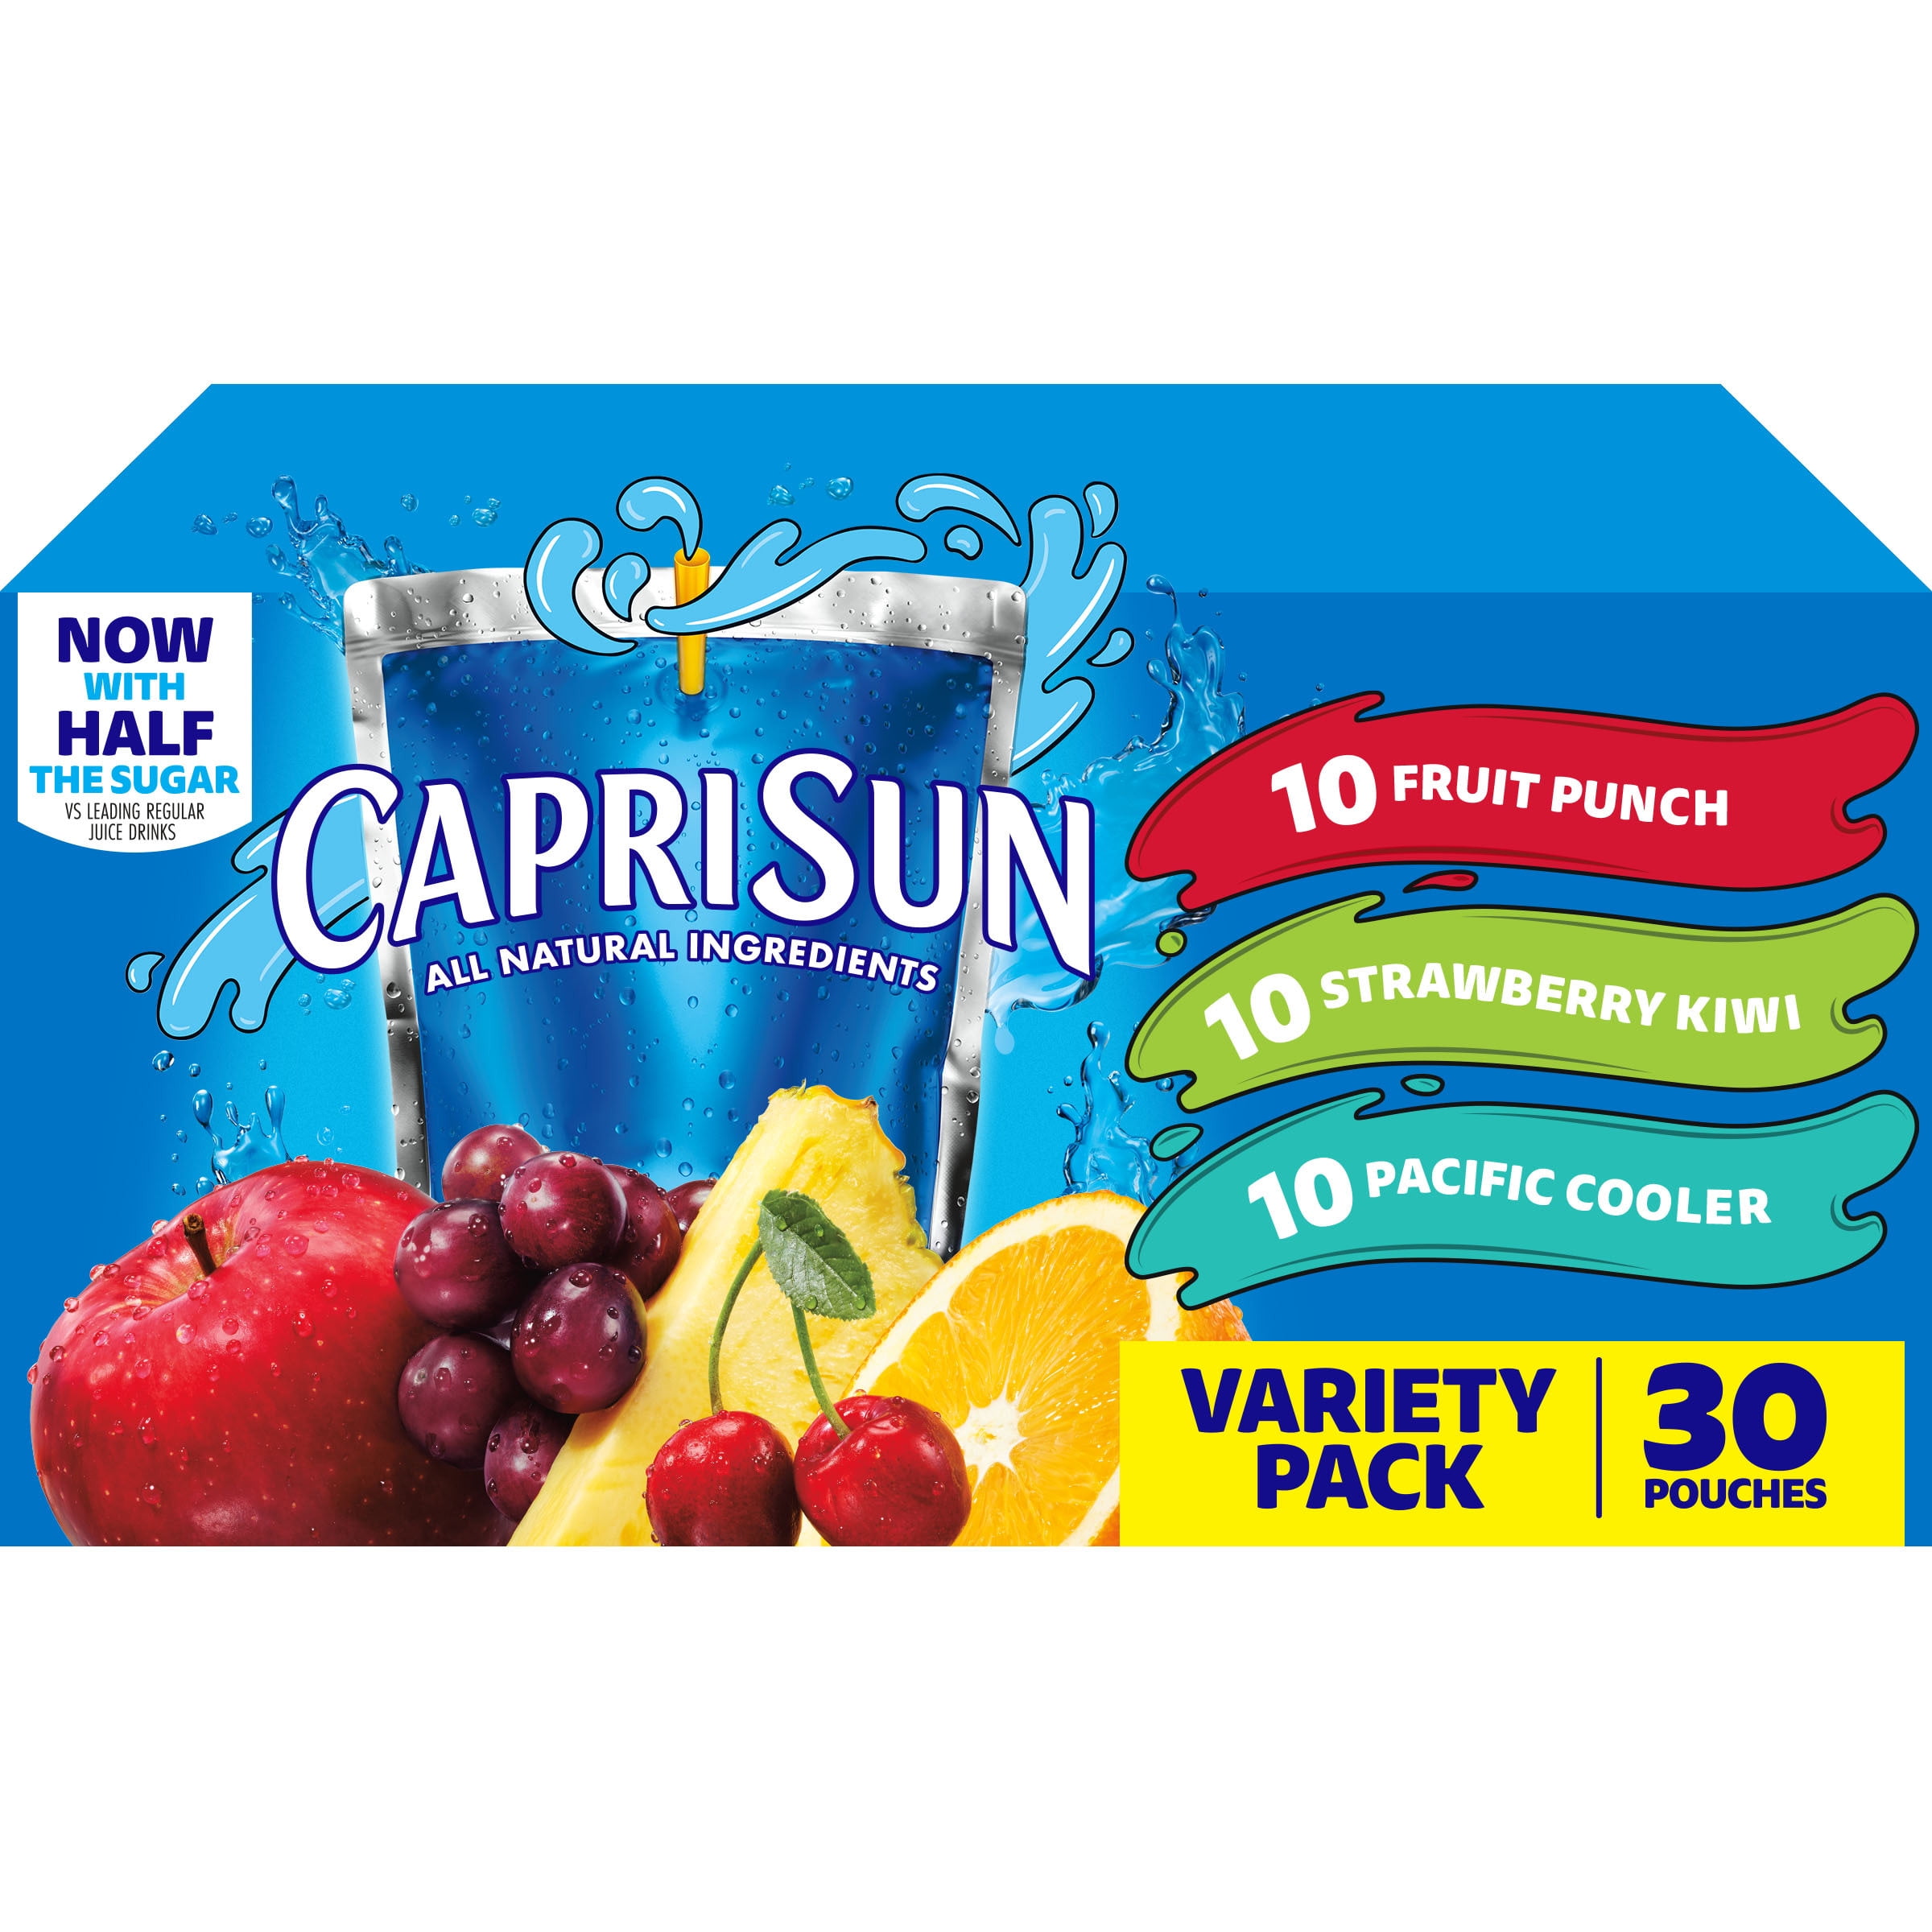 Capri Sun Variety Pack with Fruit Punch, Strawberry Kiwi and Pacific Cooler Juice Box Pouches, 30 Ct Box, 6 fl oz Pouches